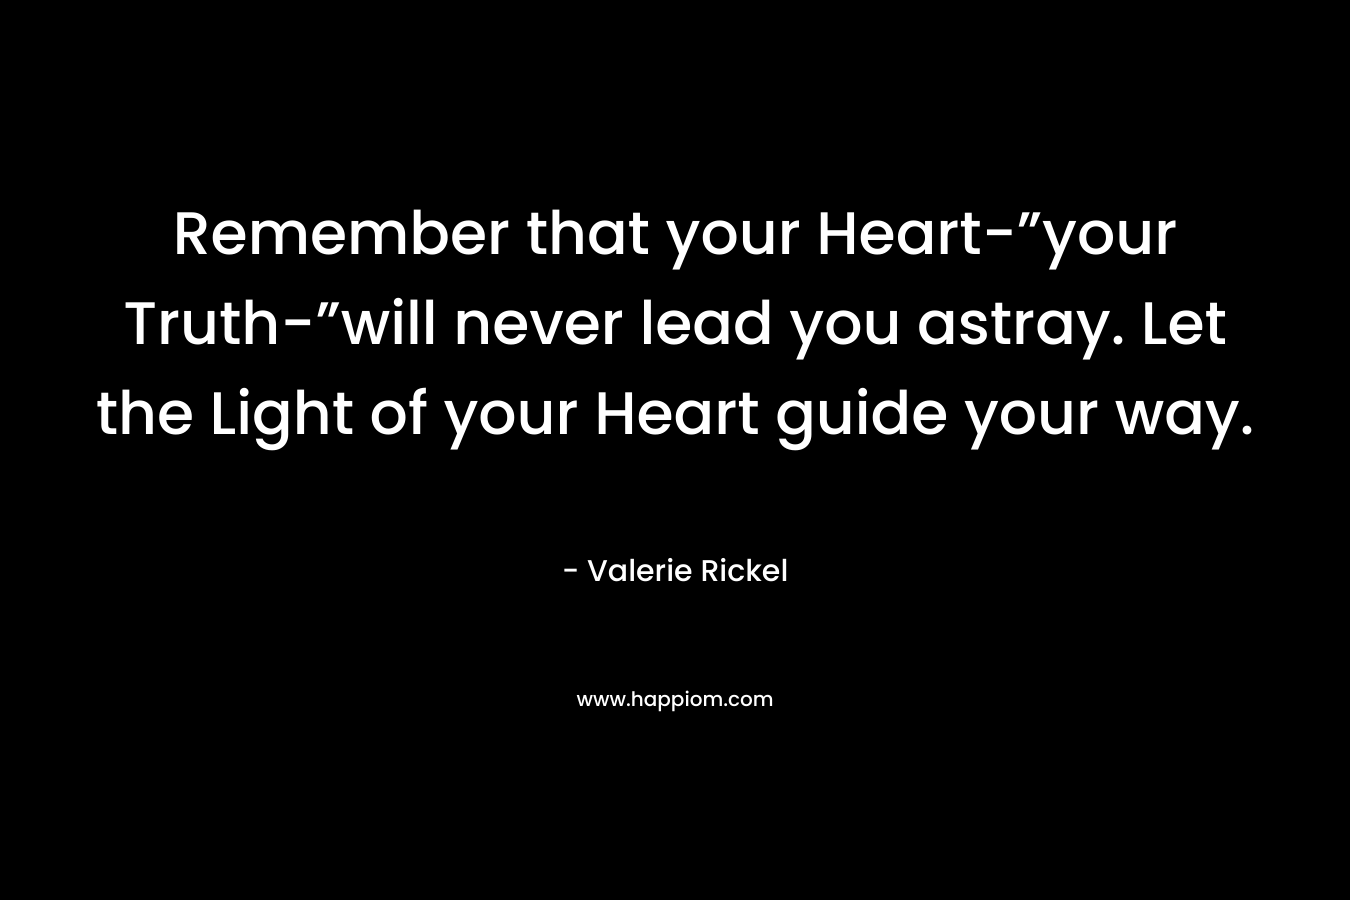 Remember that your Heart-”your Truth-”will never lead you astray. Let the Light of your Heart guide your way. – Valerie Rickel